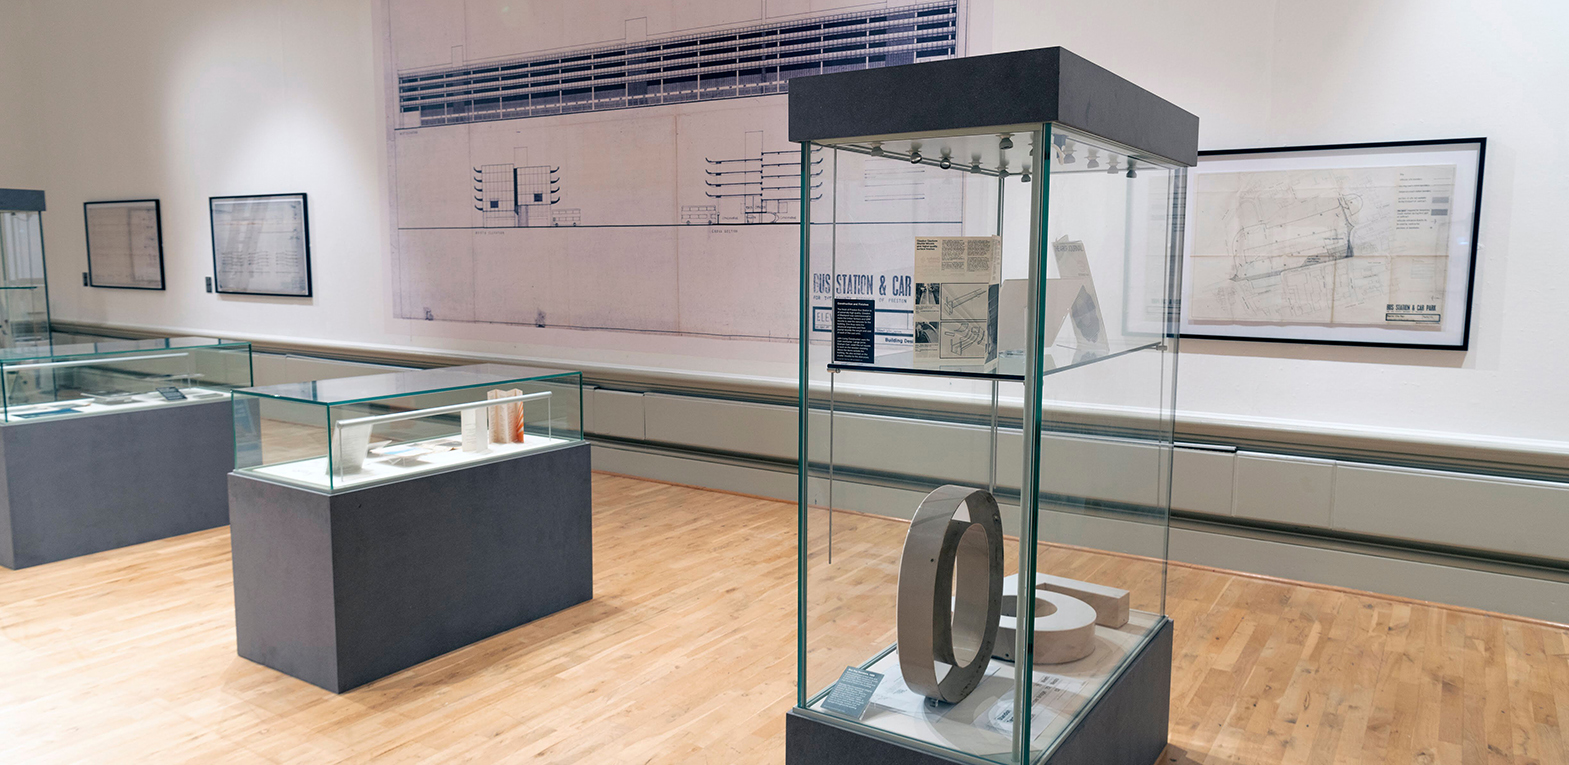 The exhibition in the Harris Museum. Artifacts from the bus station in display cases including models, pamphlets and the digital portion of the original clock. They are in front of a wall display of plans and architectural drawings.